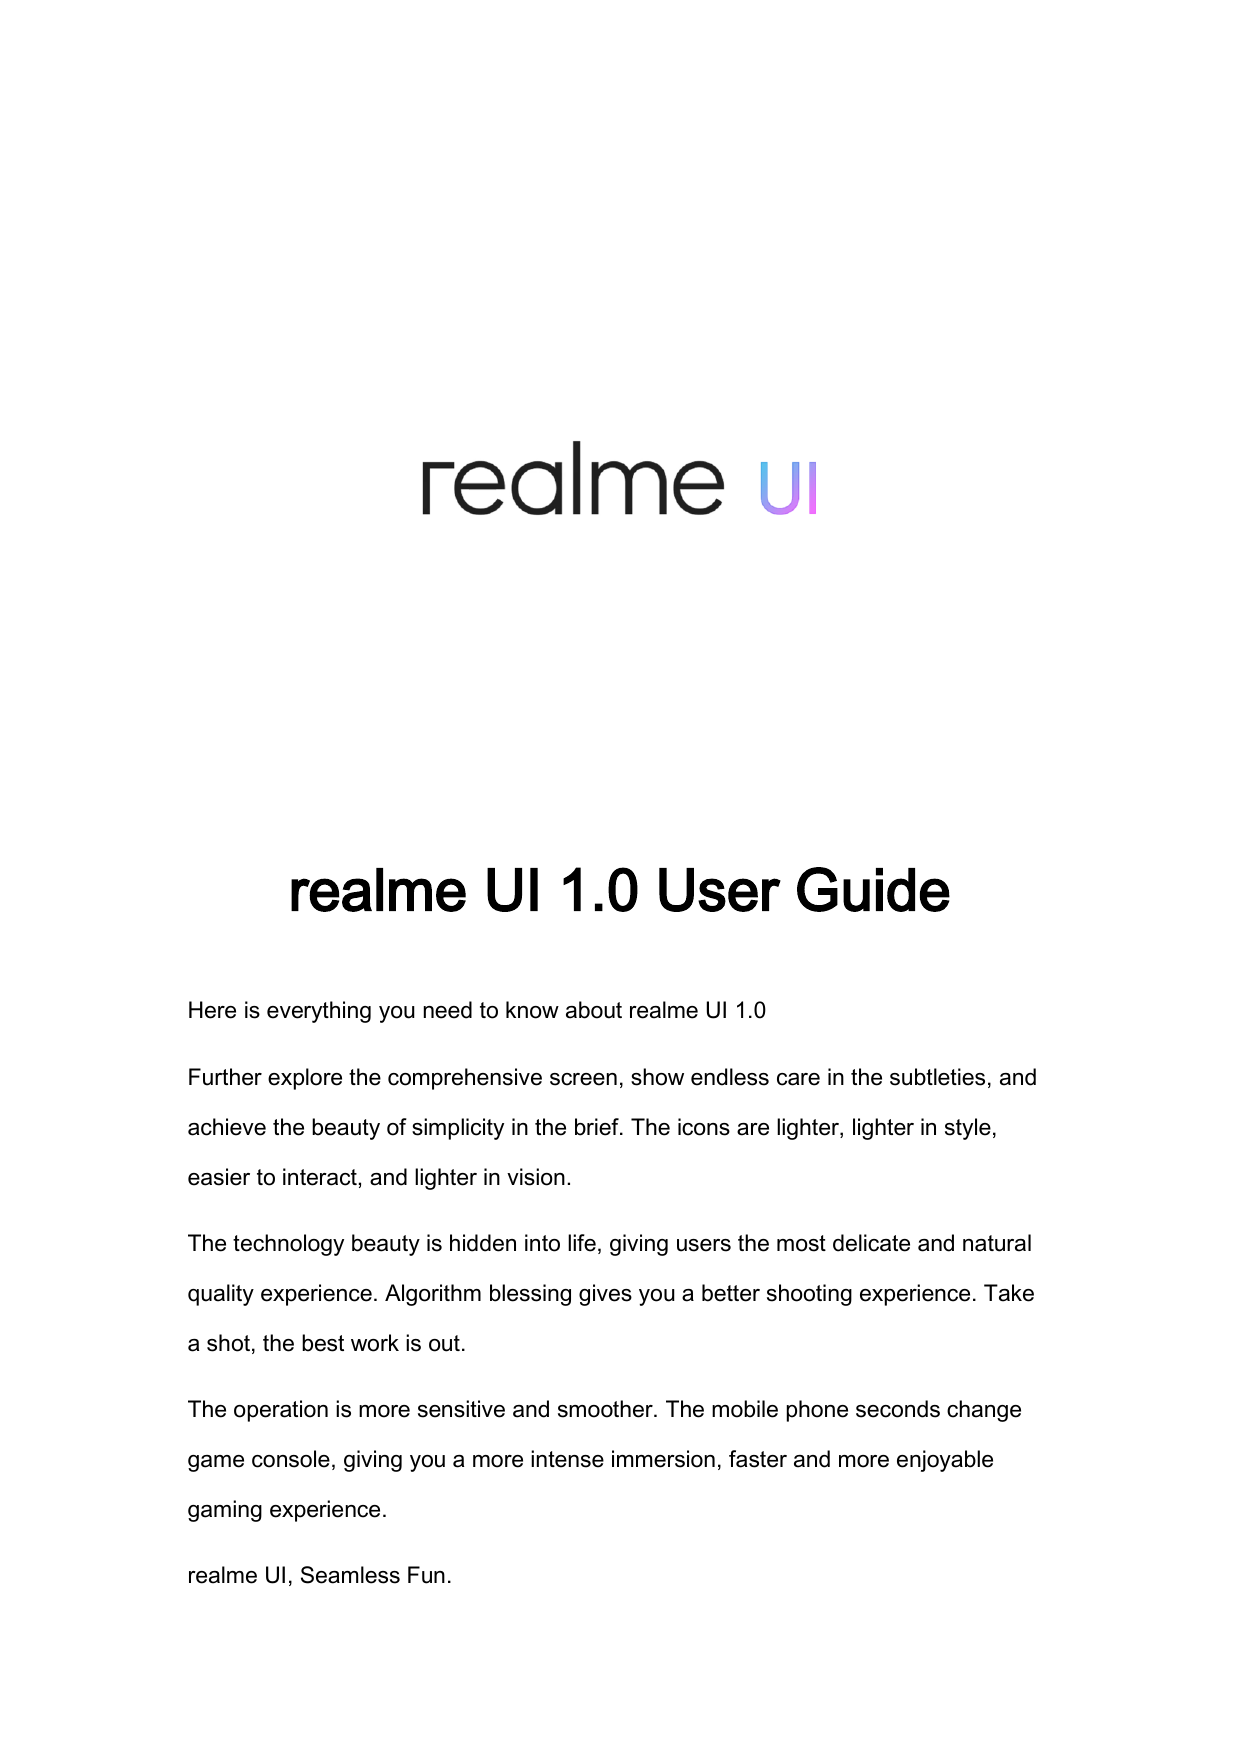 realme UI 1.0 User GuideHere is everything you need to know about realme UI 1.0Further explore the comprehensive screen, show en